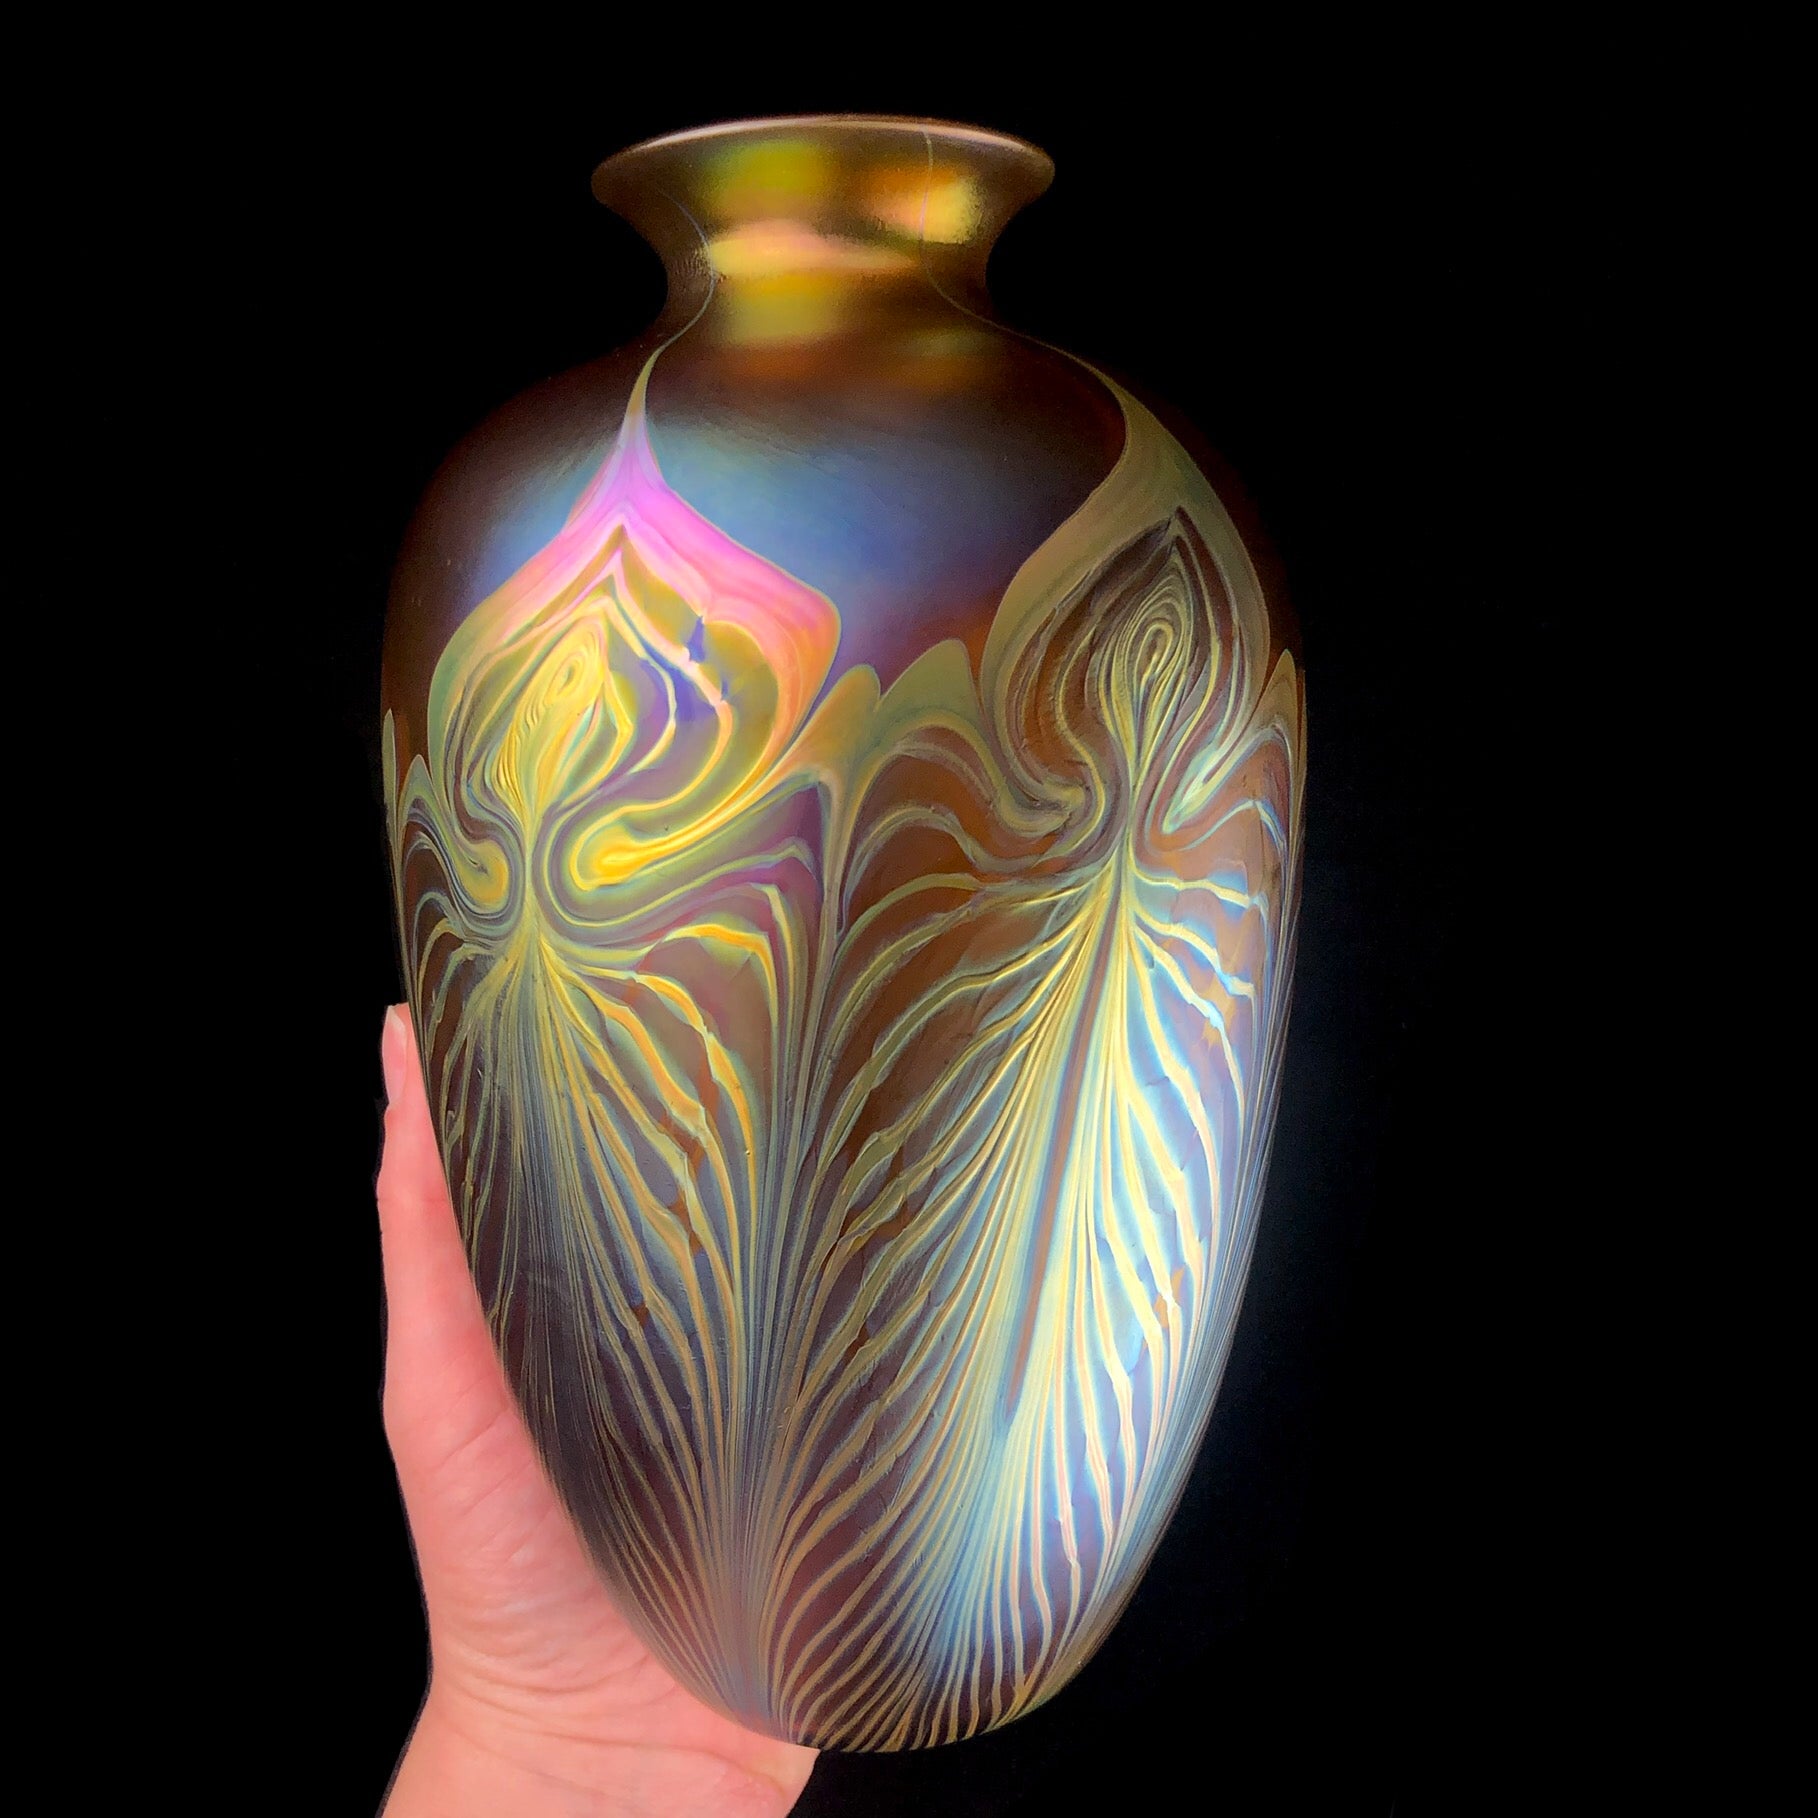 Amber Feathered Vase shown in hand